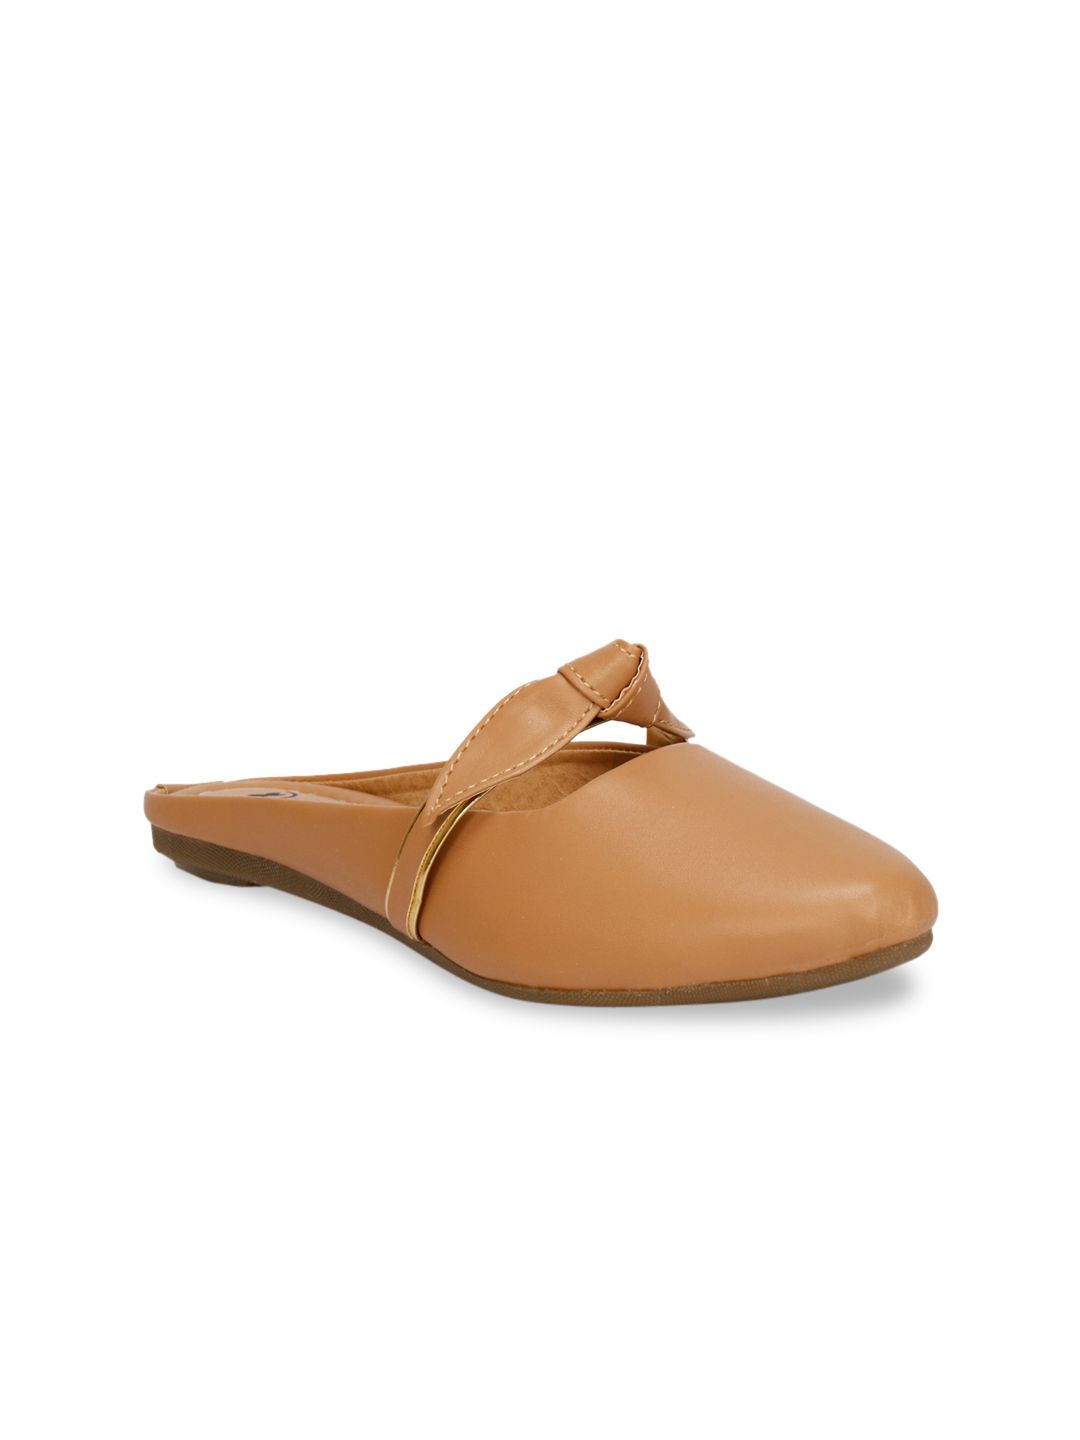 Denill Women Beige Mules with Bows Flats Price in India